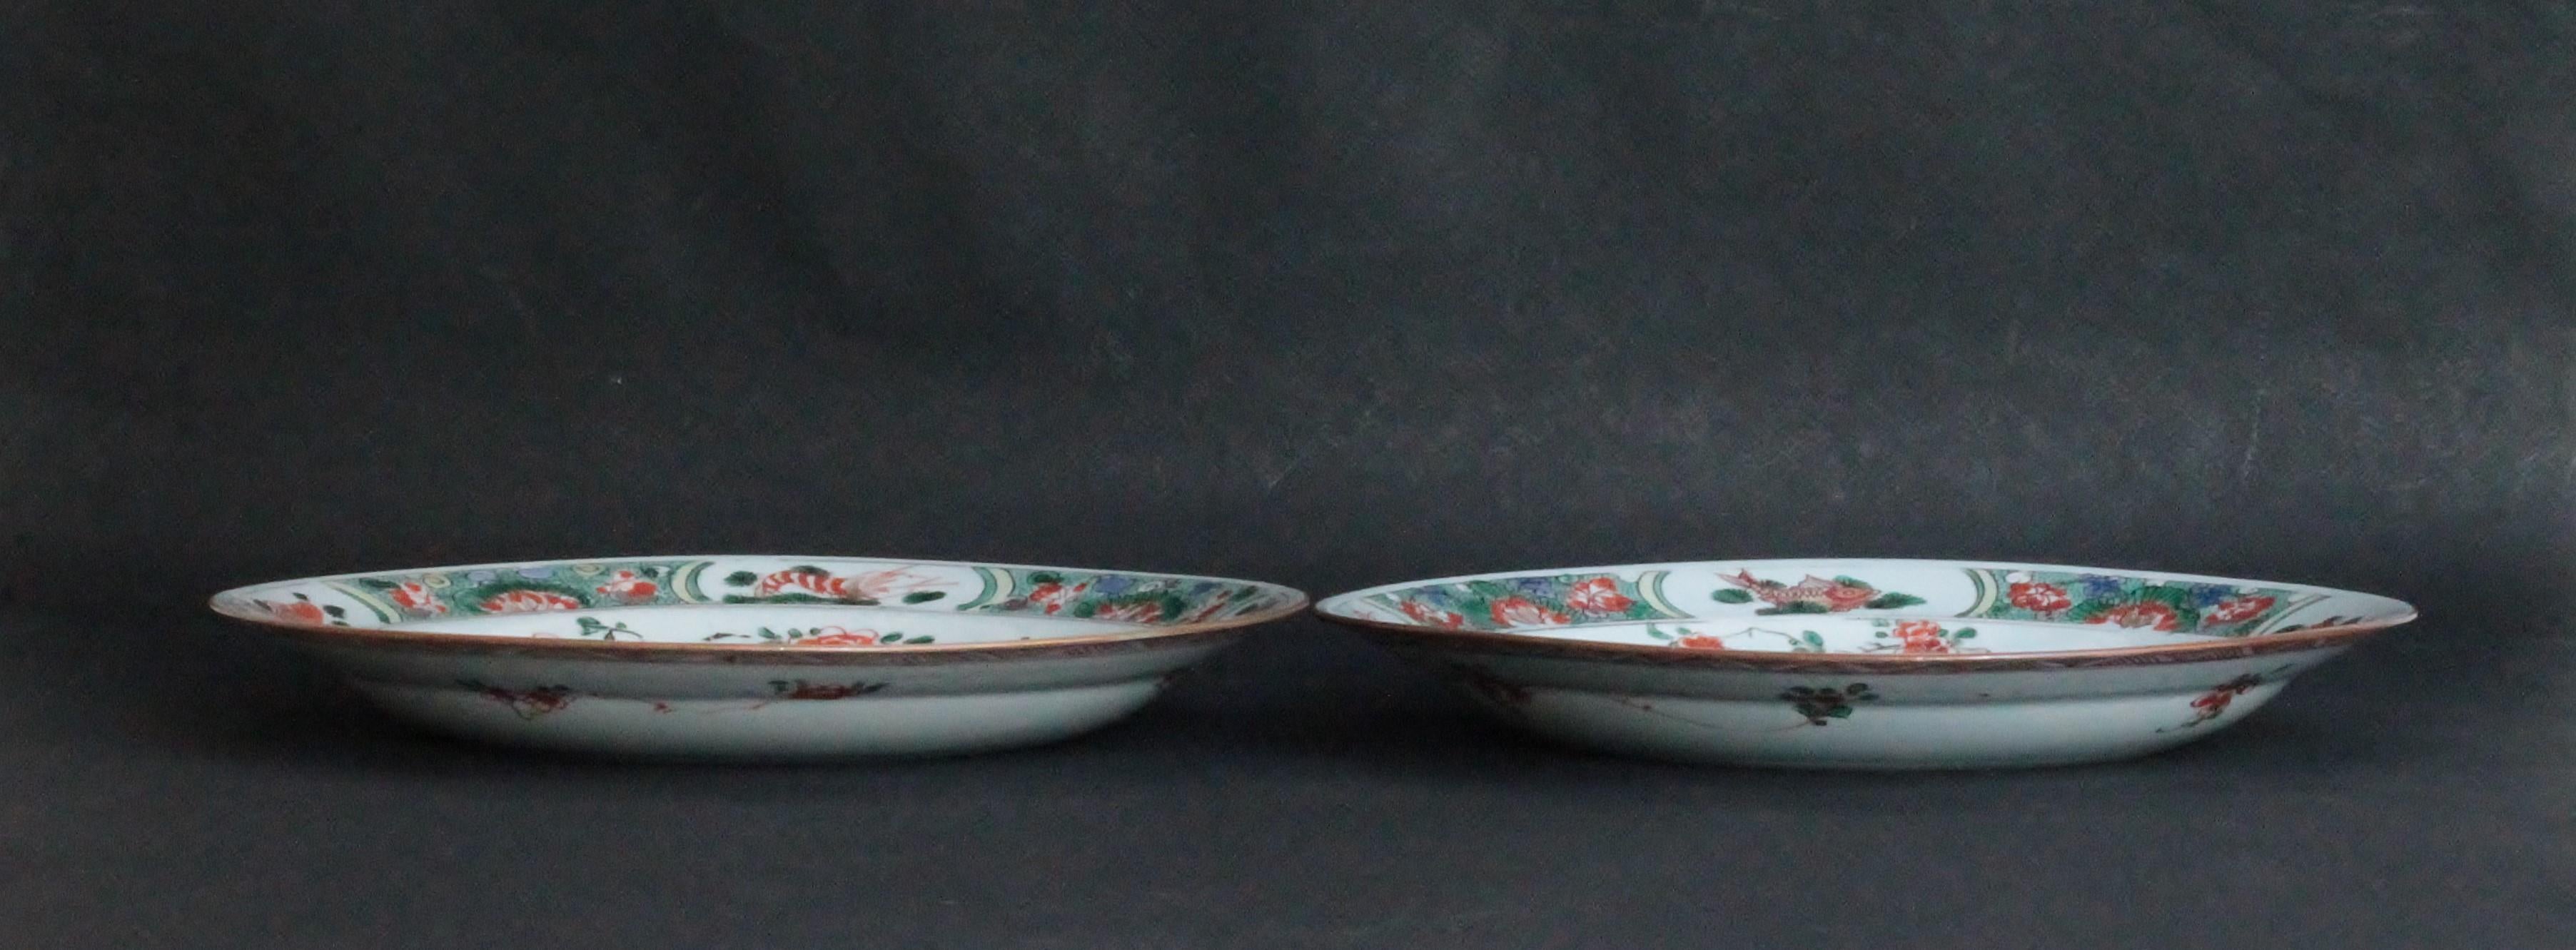 Two Famille Verte Plates in China Porcelain, Kangxi Period ‘1662-1722’ 5